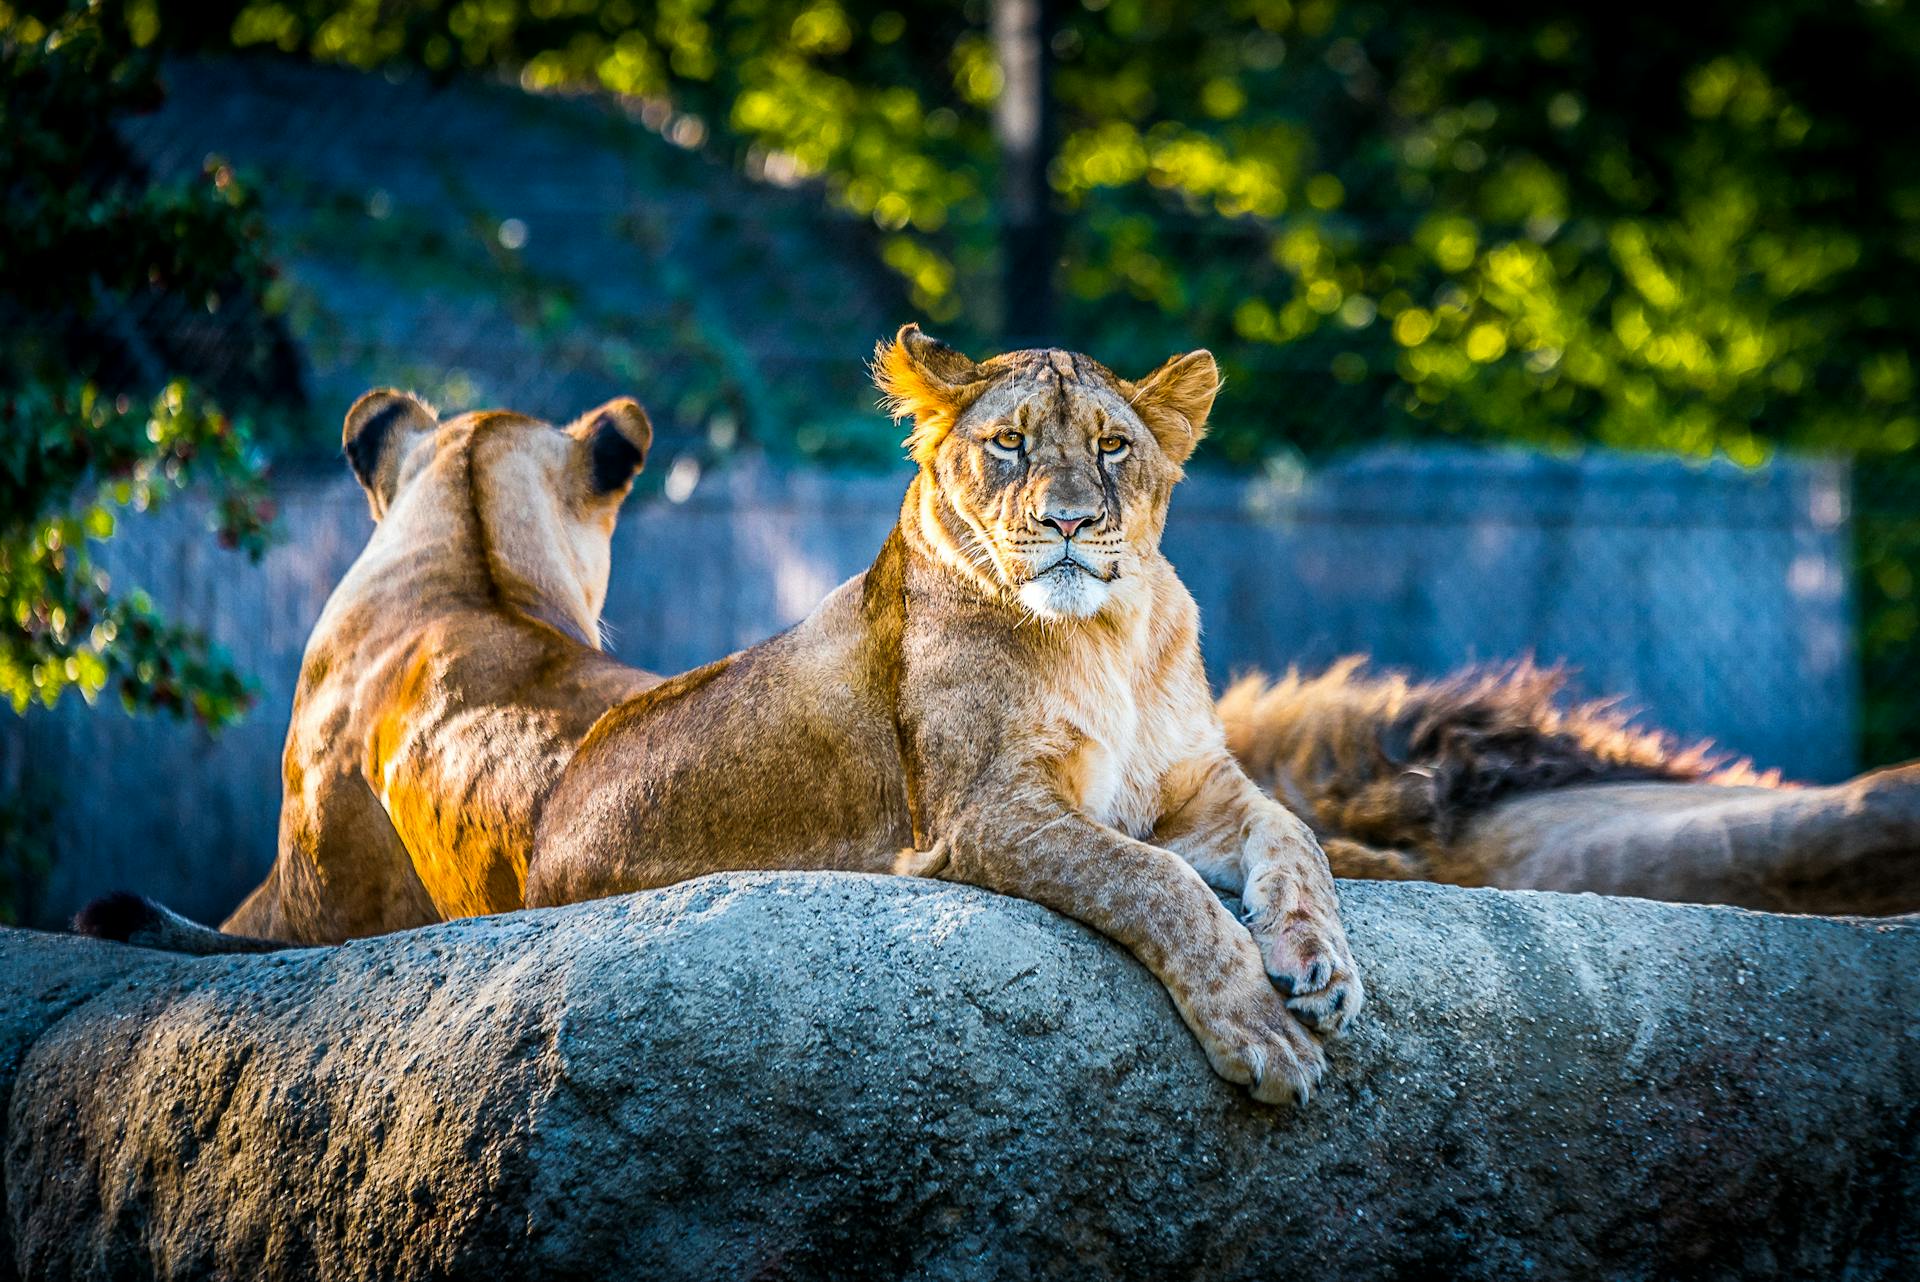 Lions sitting on a rock | Source: Pexels